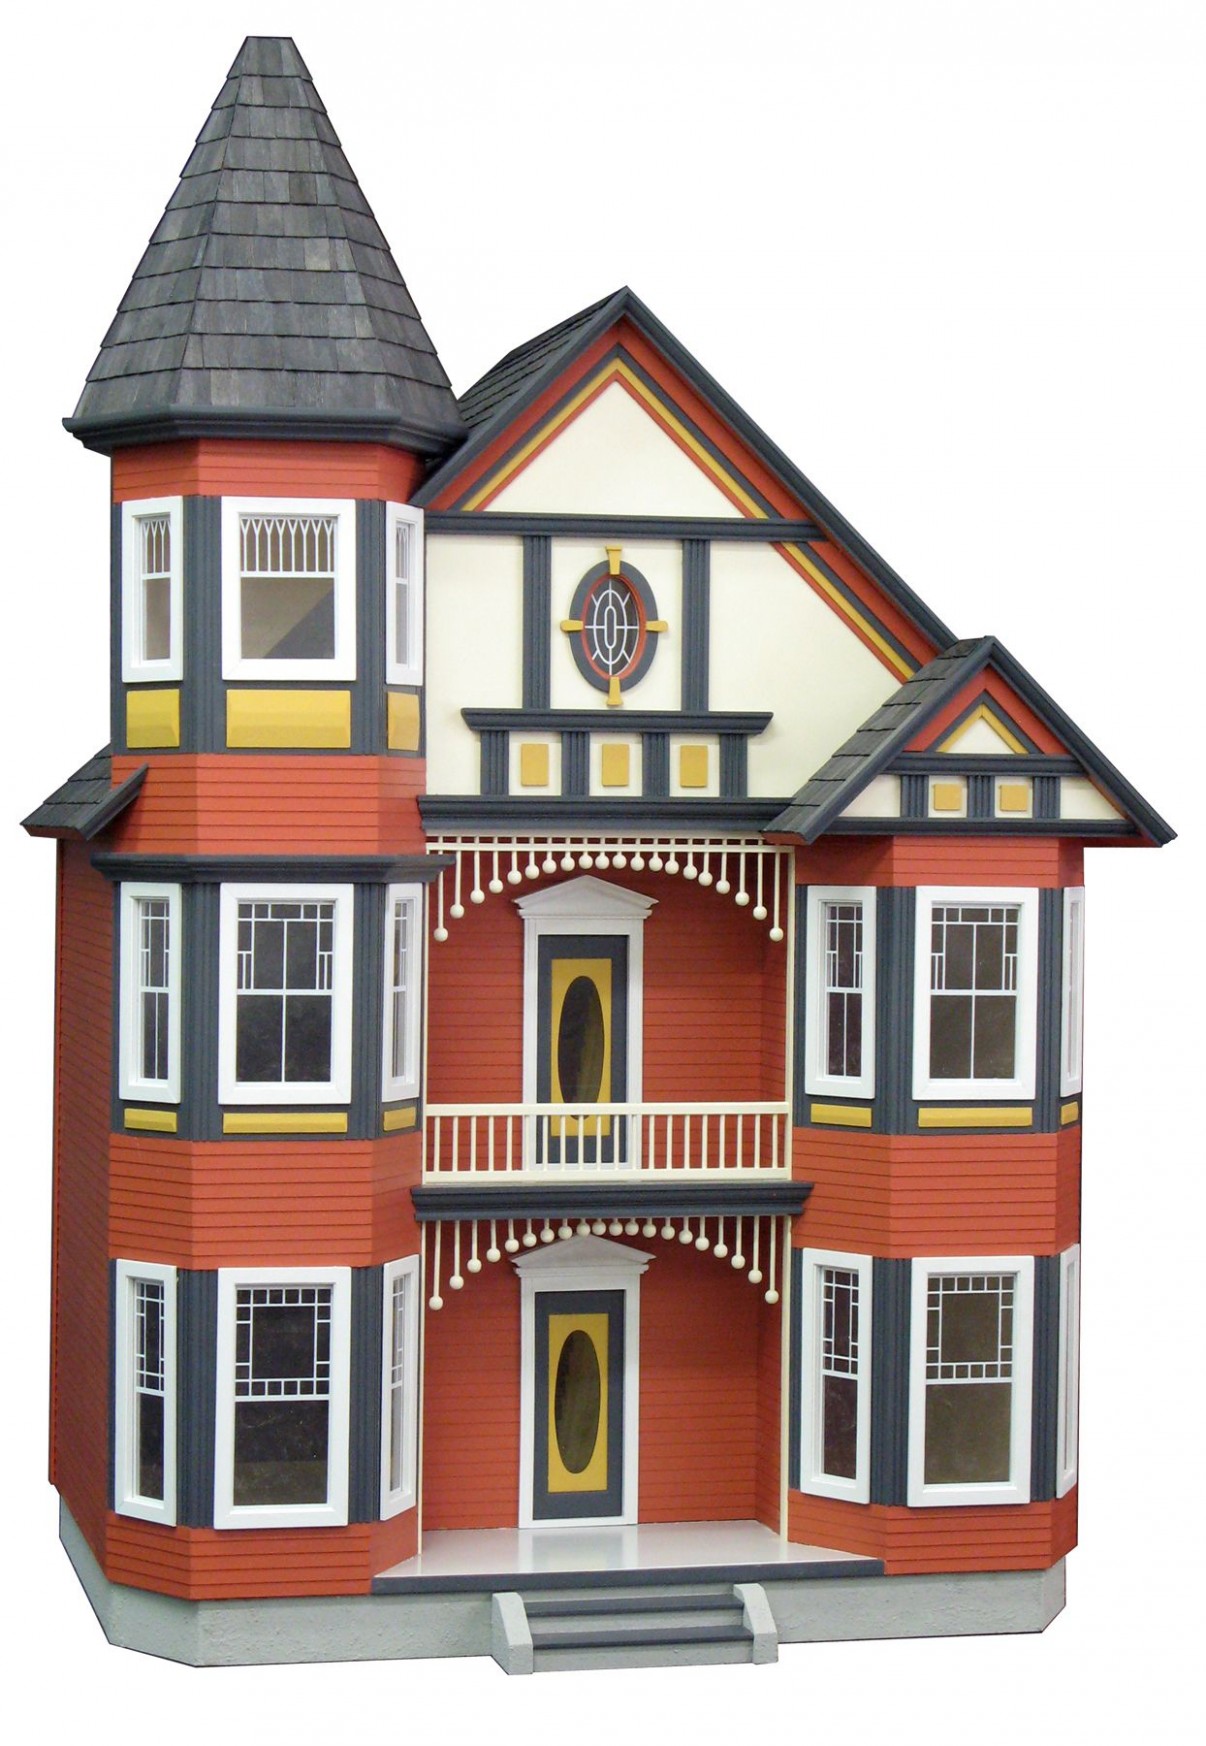 How To Paint A Wooden Dollhouse Google Search | My ..